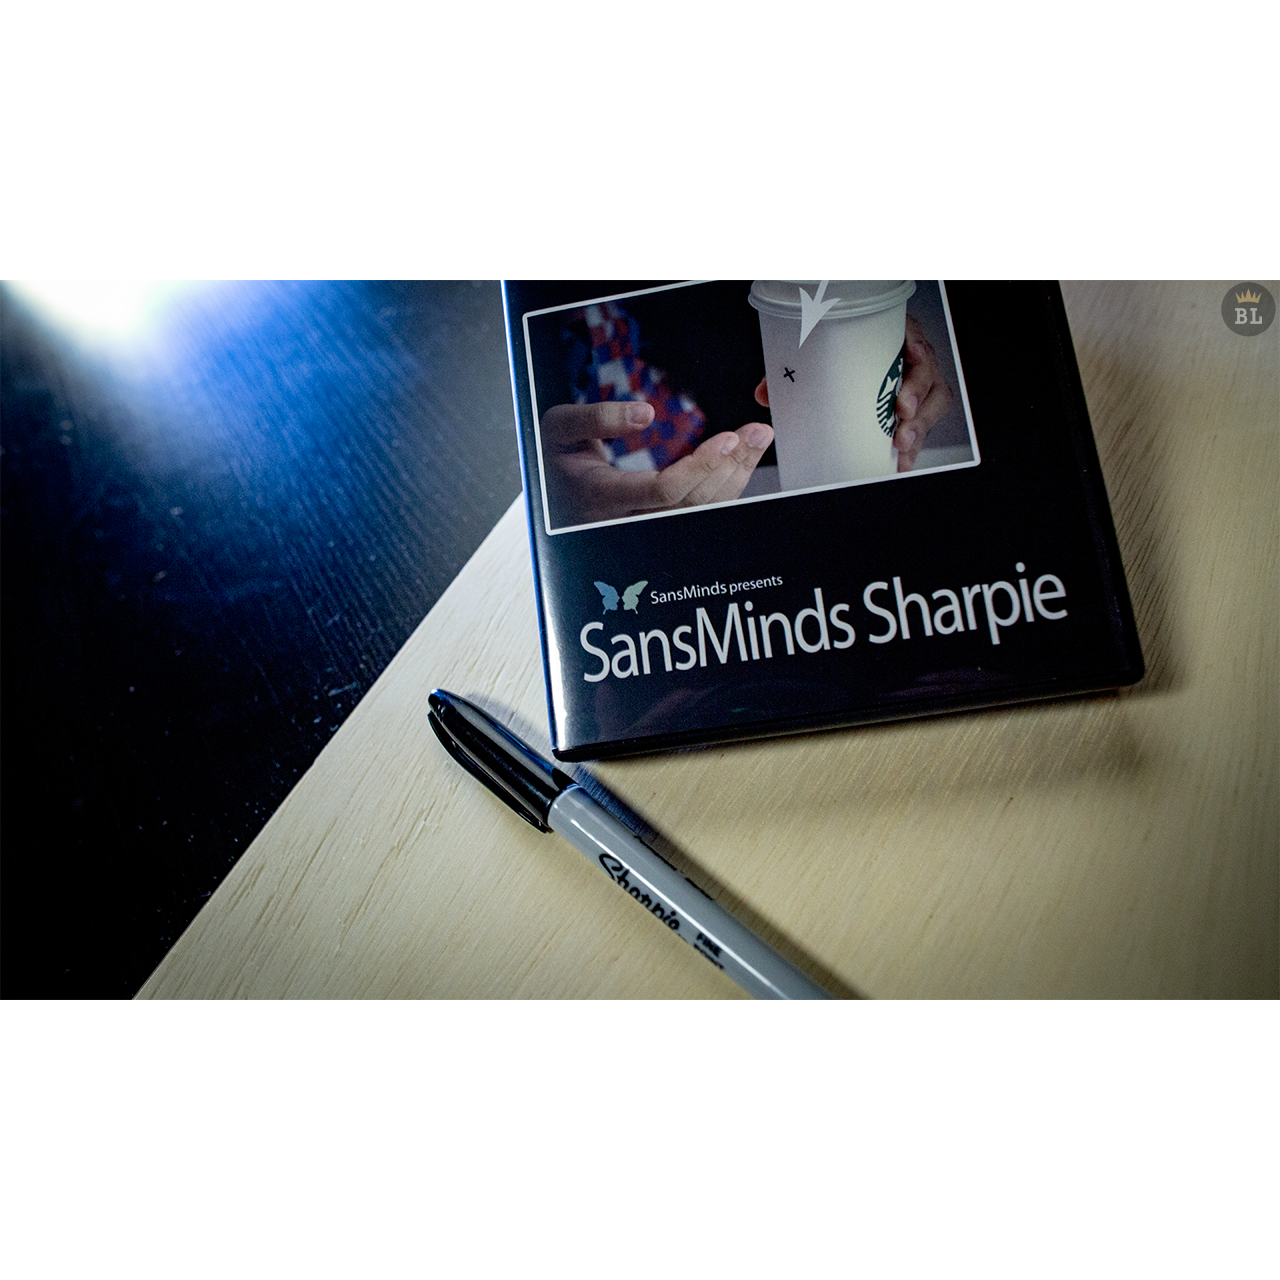 SansMinds Sharpie (DVD and Gimmick) by Will Tsai